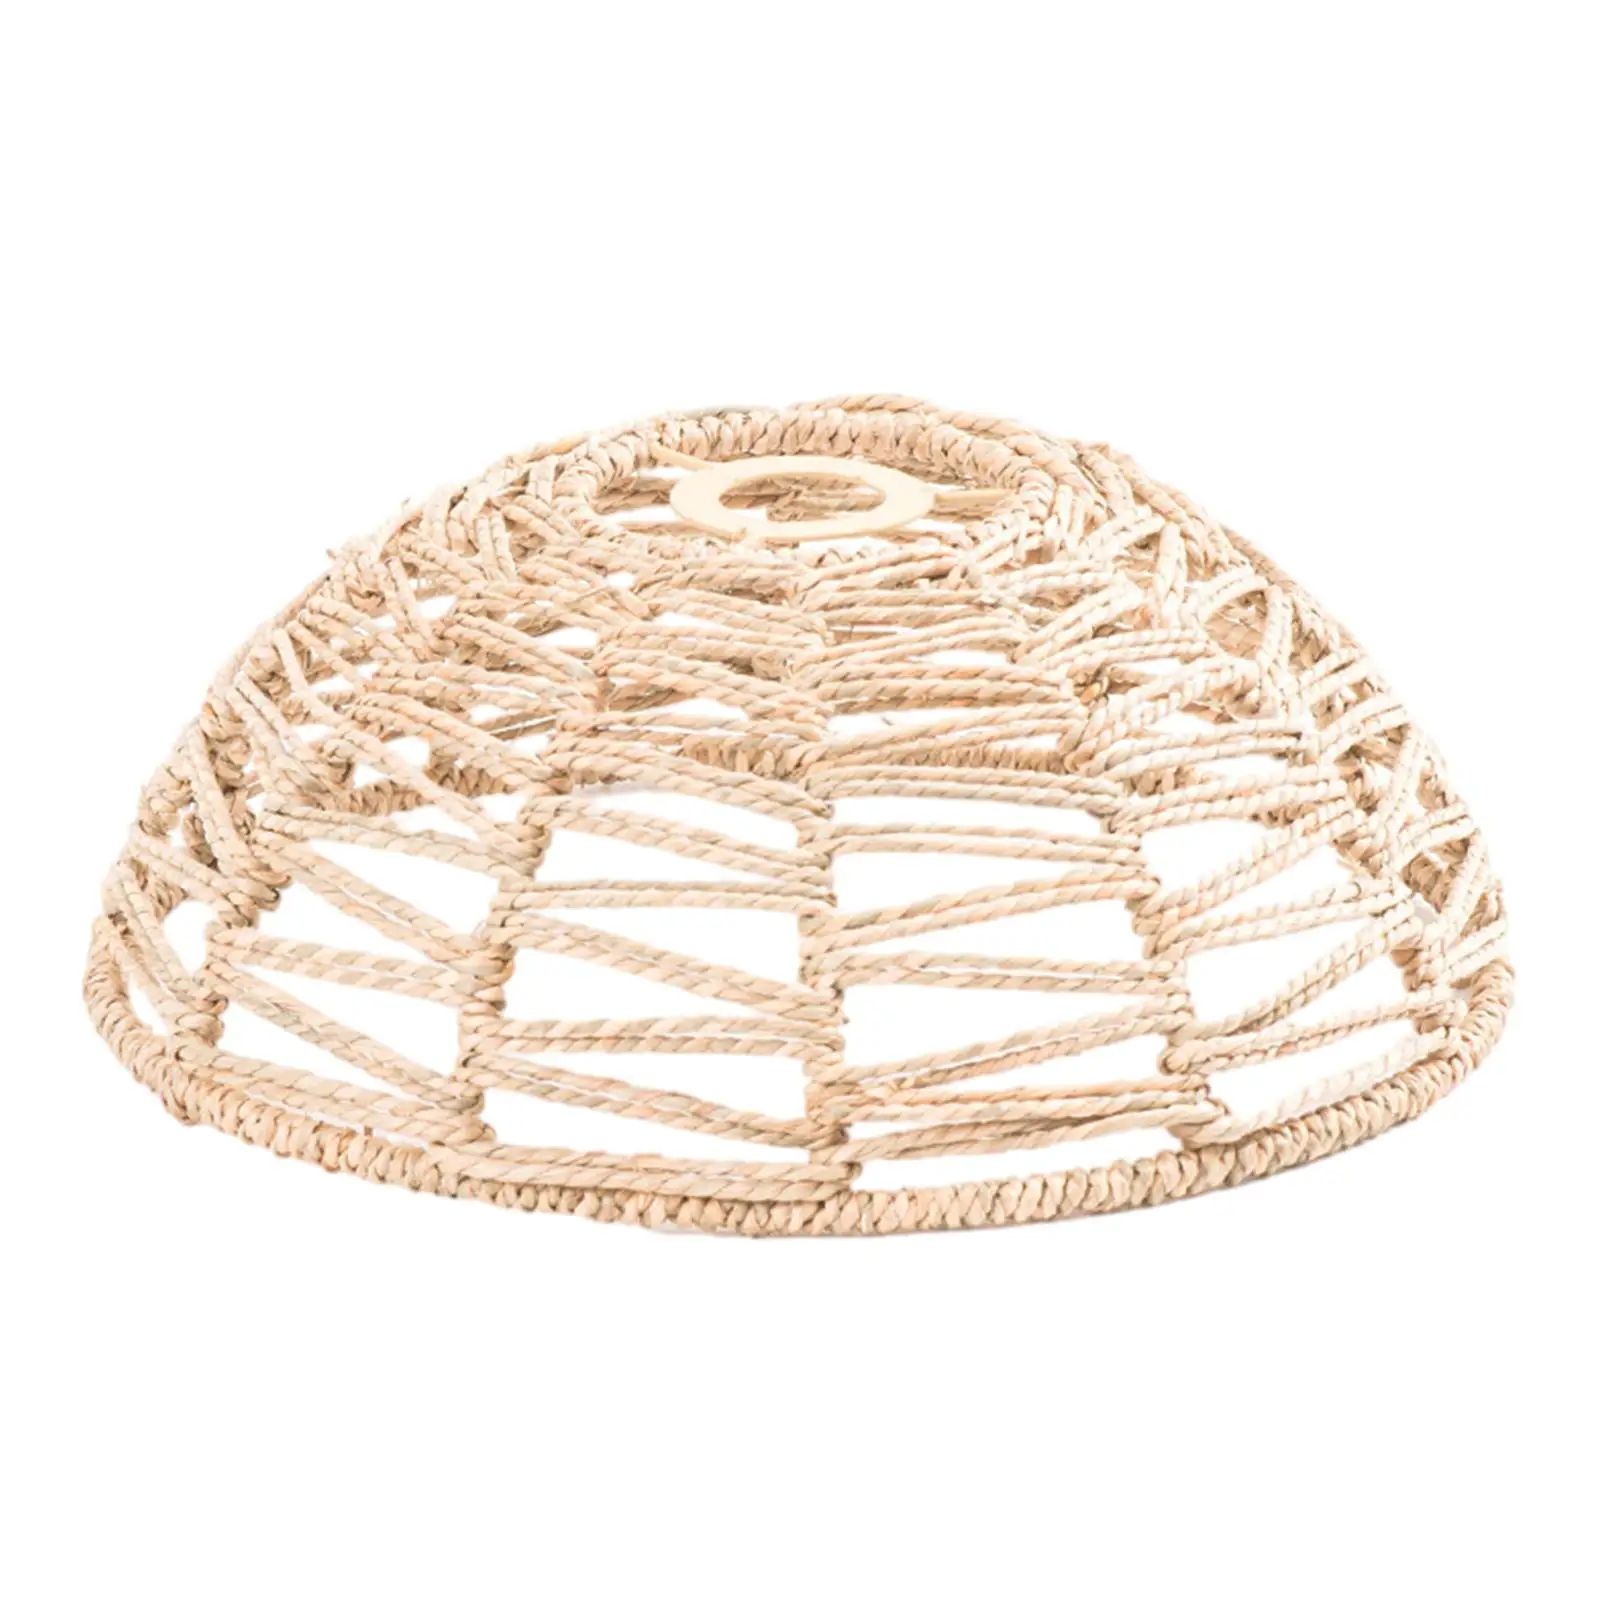 Rattan Lampshade Chandelier Lamp Cover for Ceiling Light Fixture Table Lamp